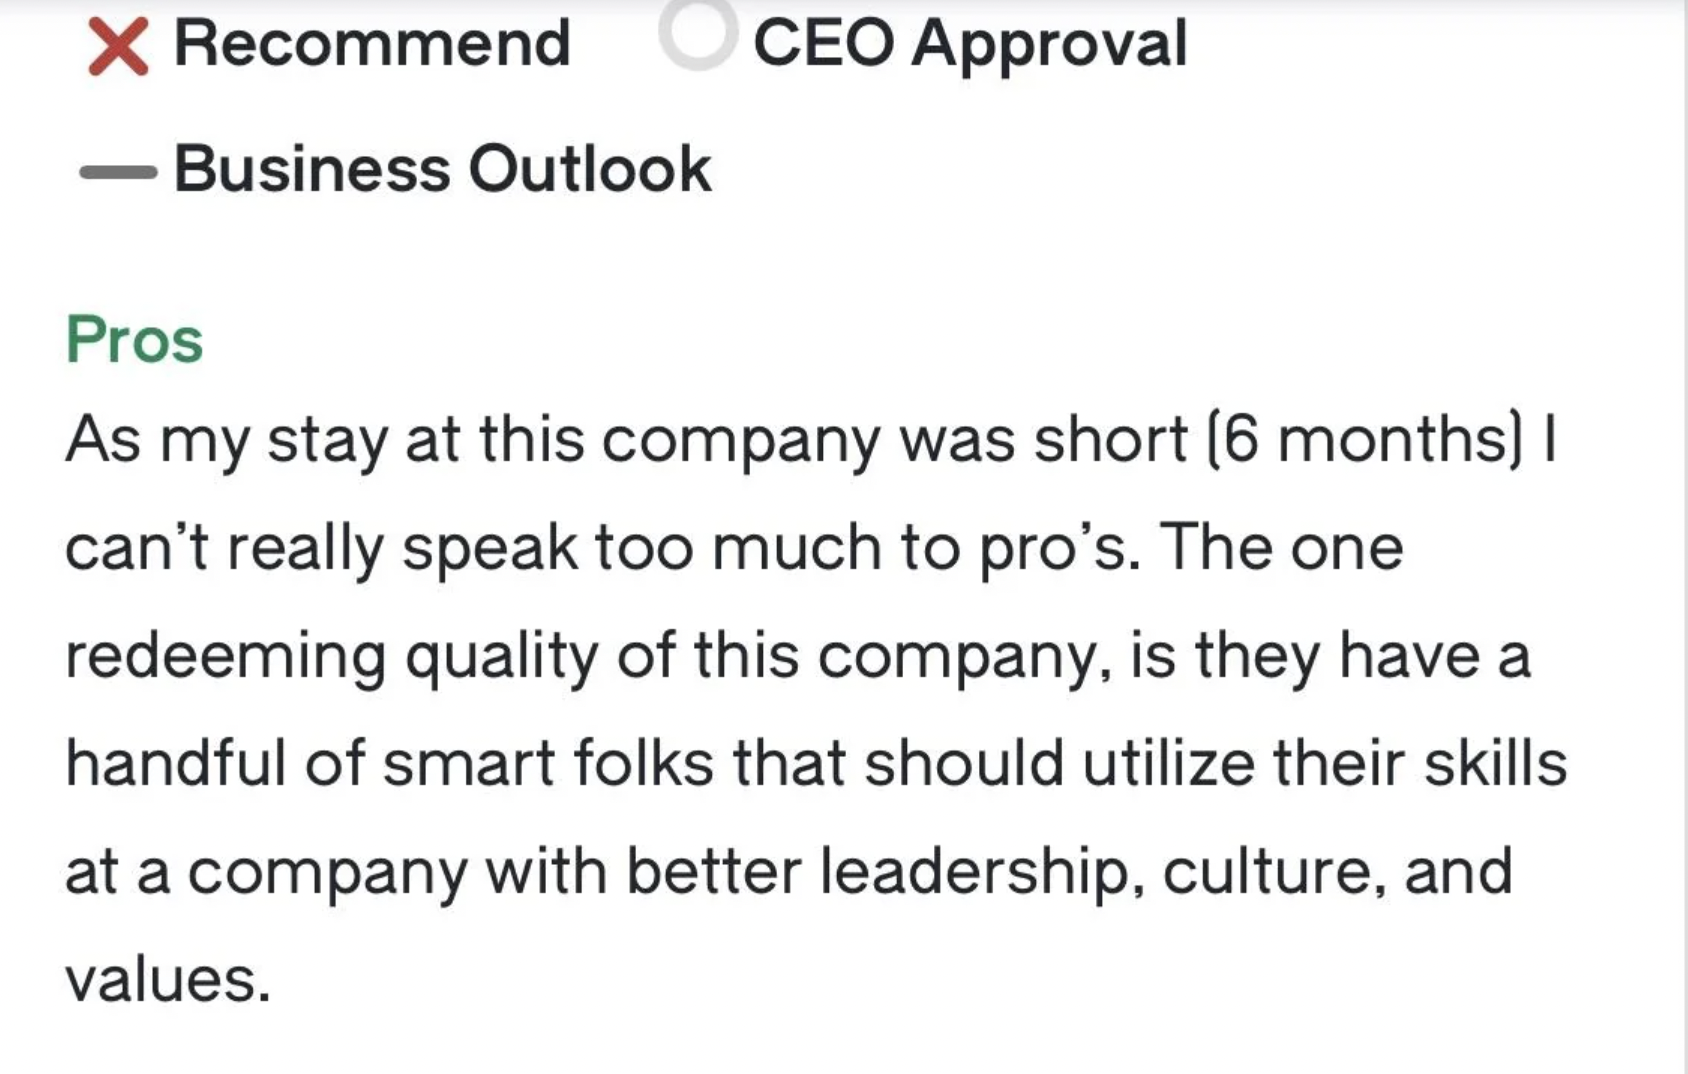 paper - X Recommend Business Outlook Ceo Approval Pros As my stay at this company was short 6 months | can't really speak too much to pro's. The one redeeming quality of this company, is they have a handful of smart folks that should utilize their skills 